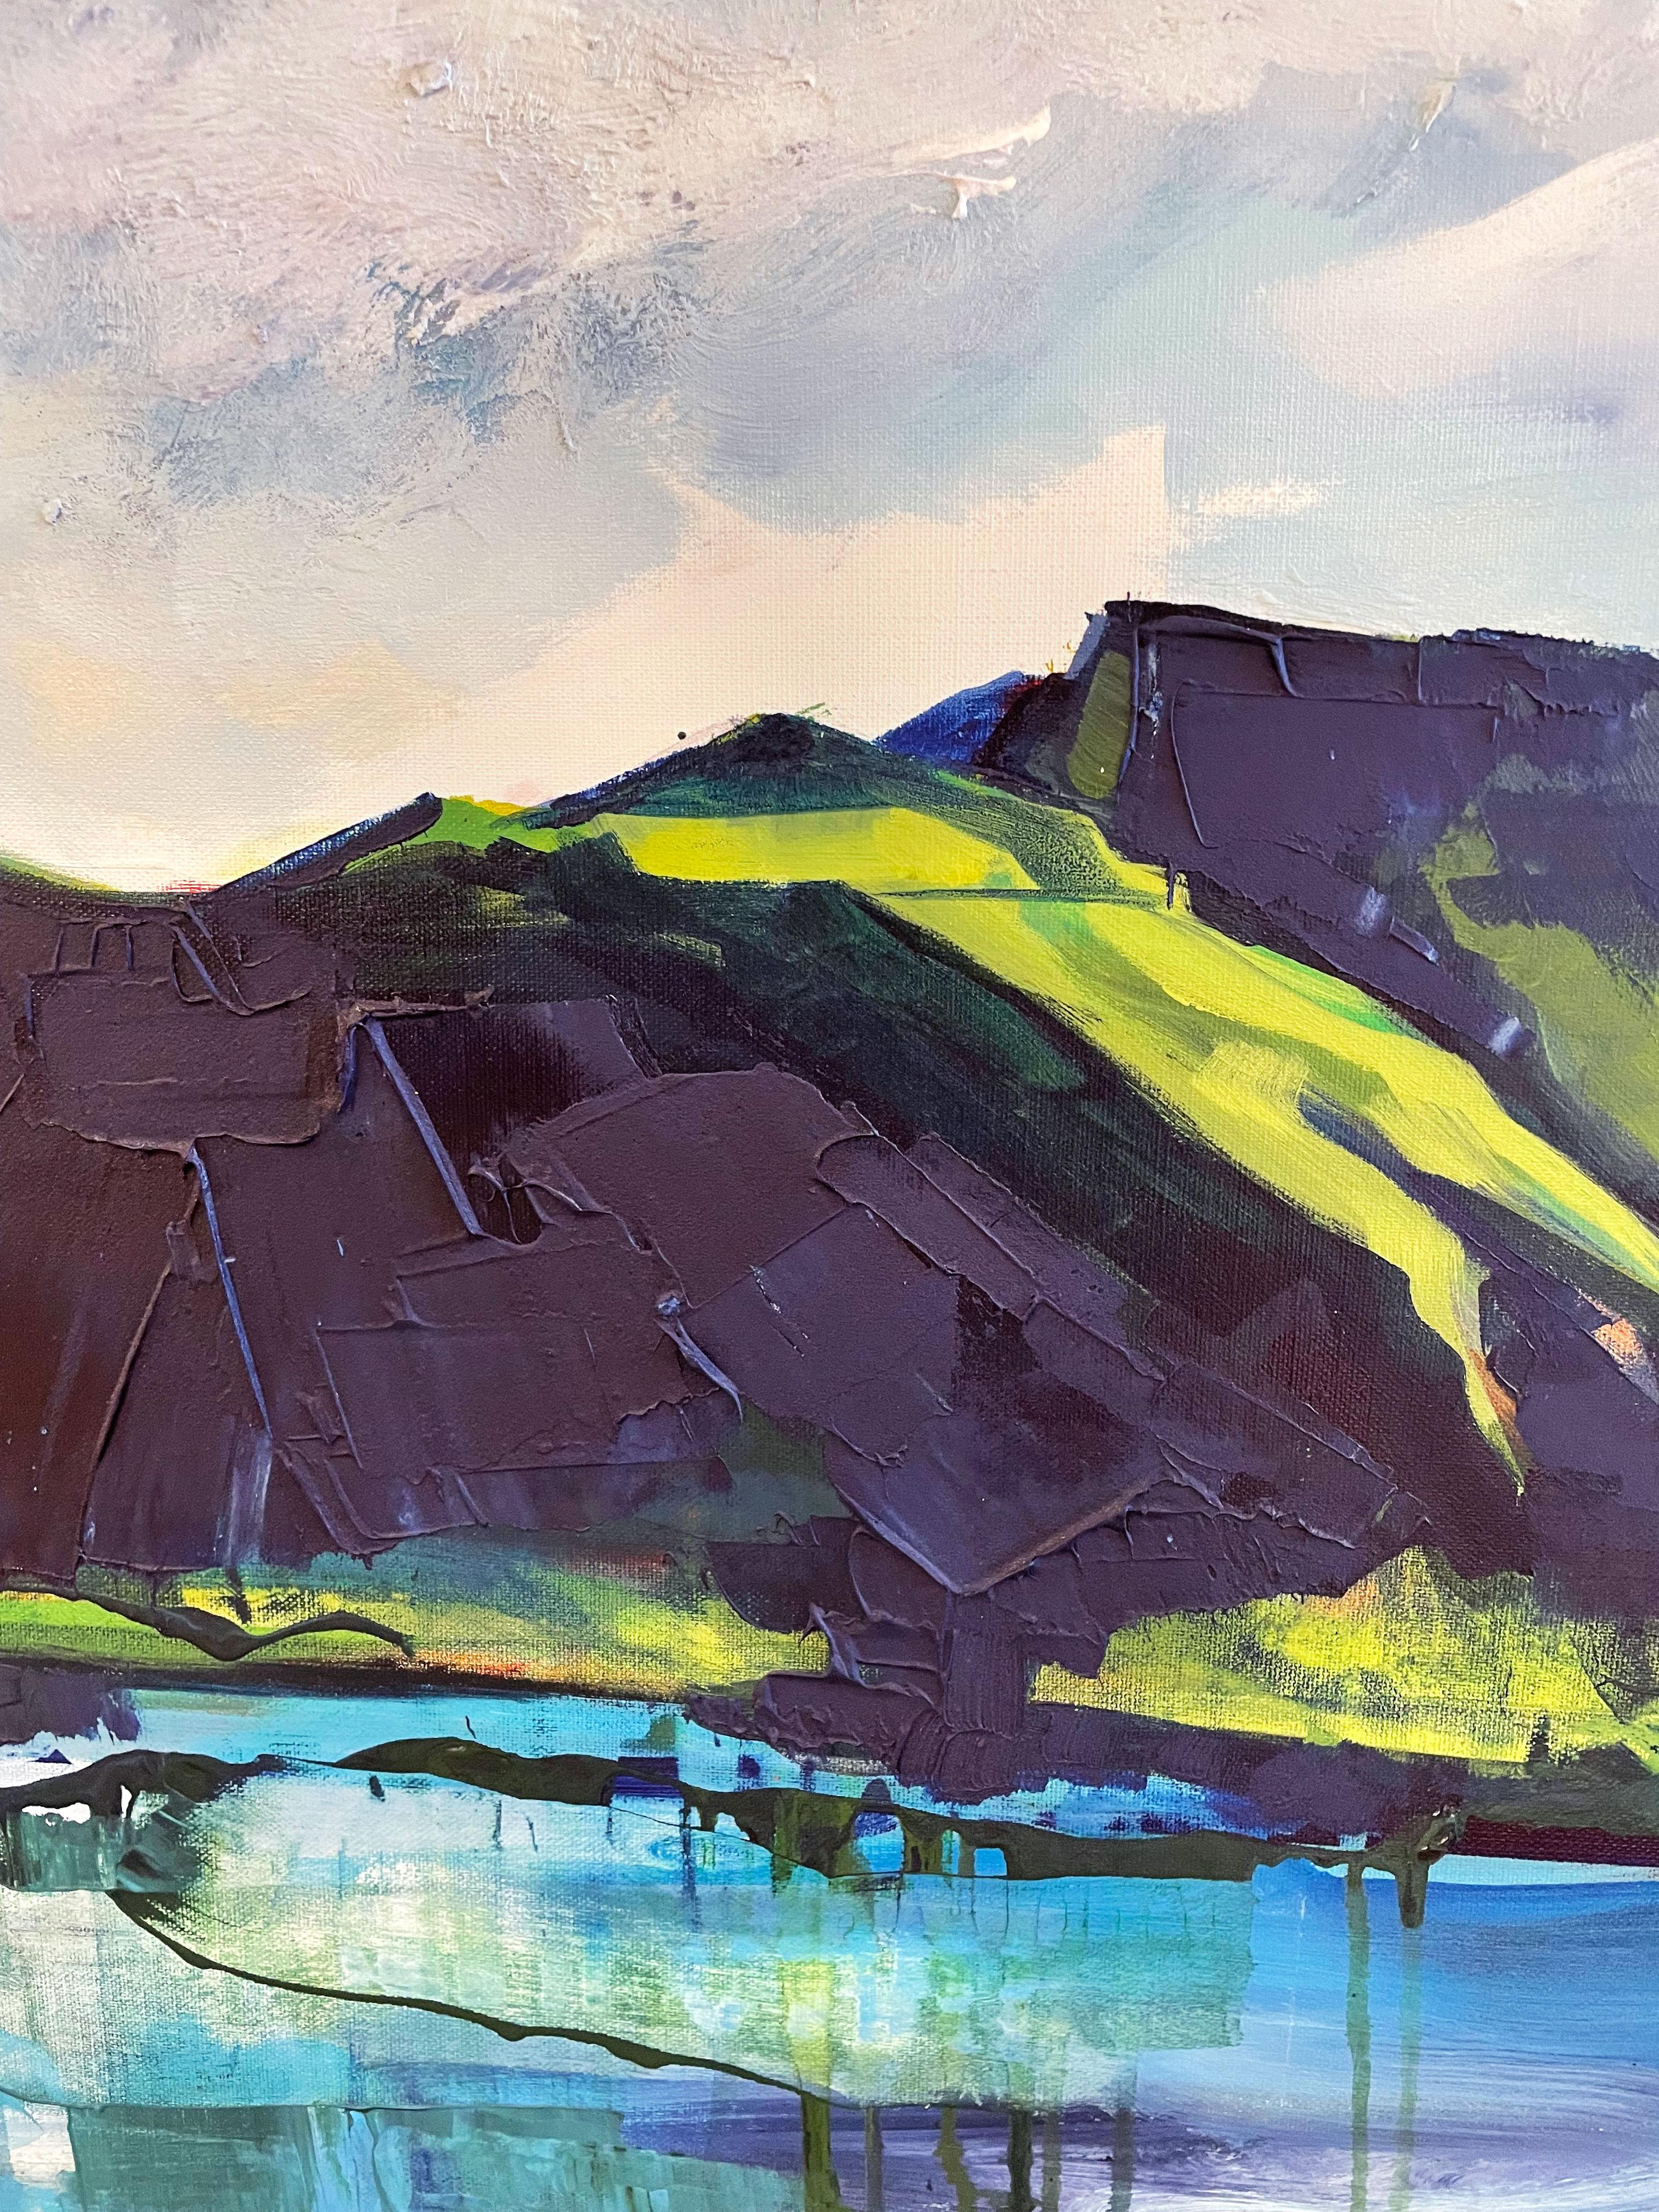 Lake Life, large textural mountain and lake landscape, acrylic on canvas, 2022 - Gray Abstract Painting by Samantha Williams-Chapelsky